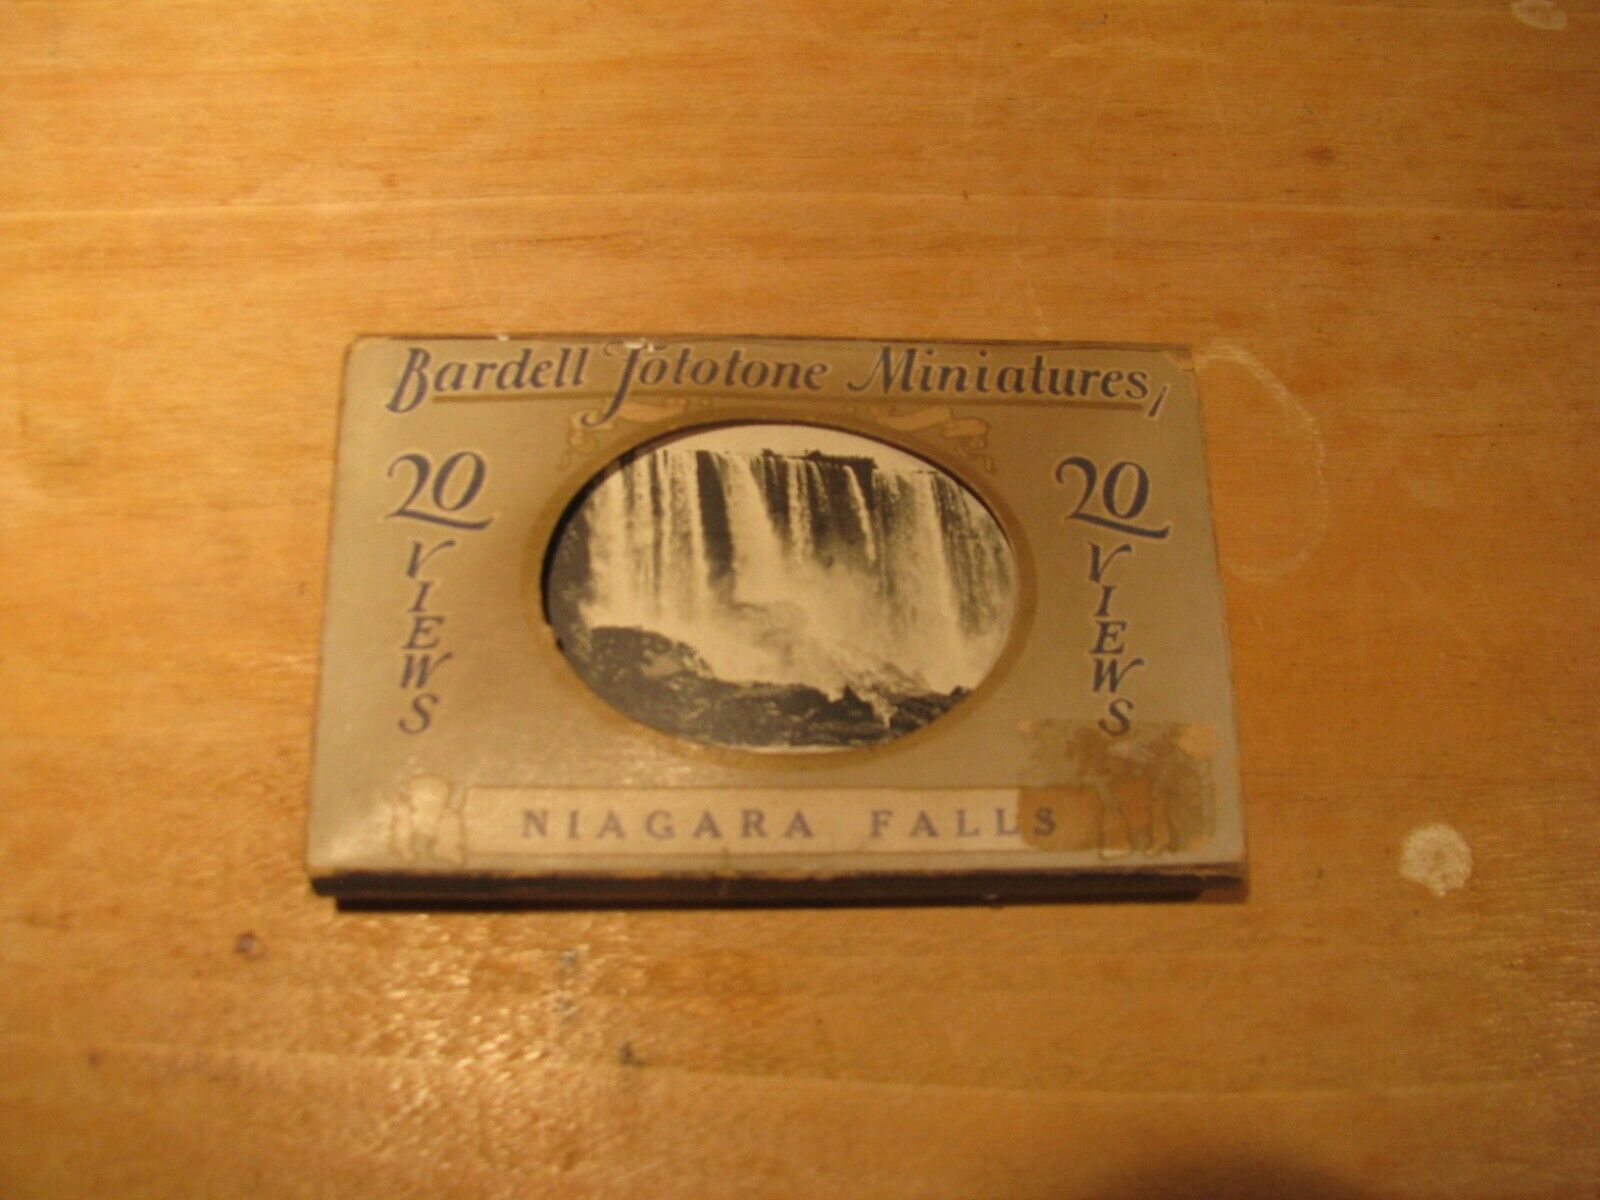 VTG Bardell Fototone Miniature Niagara Falls-17 pictures in Pack 1923 Без бренда